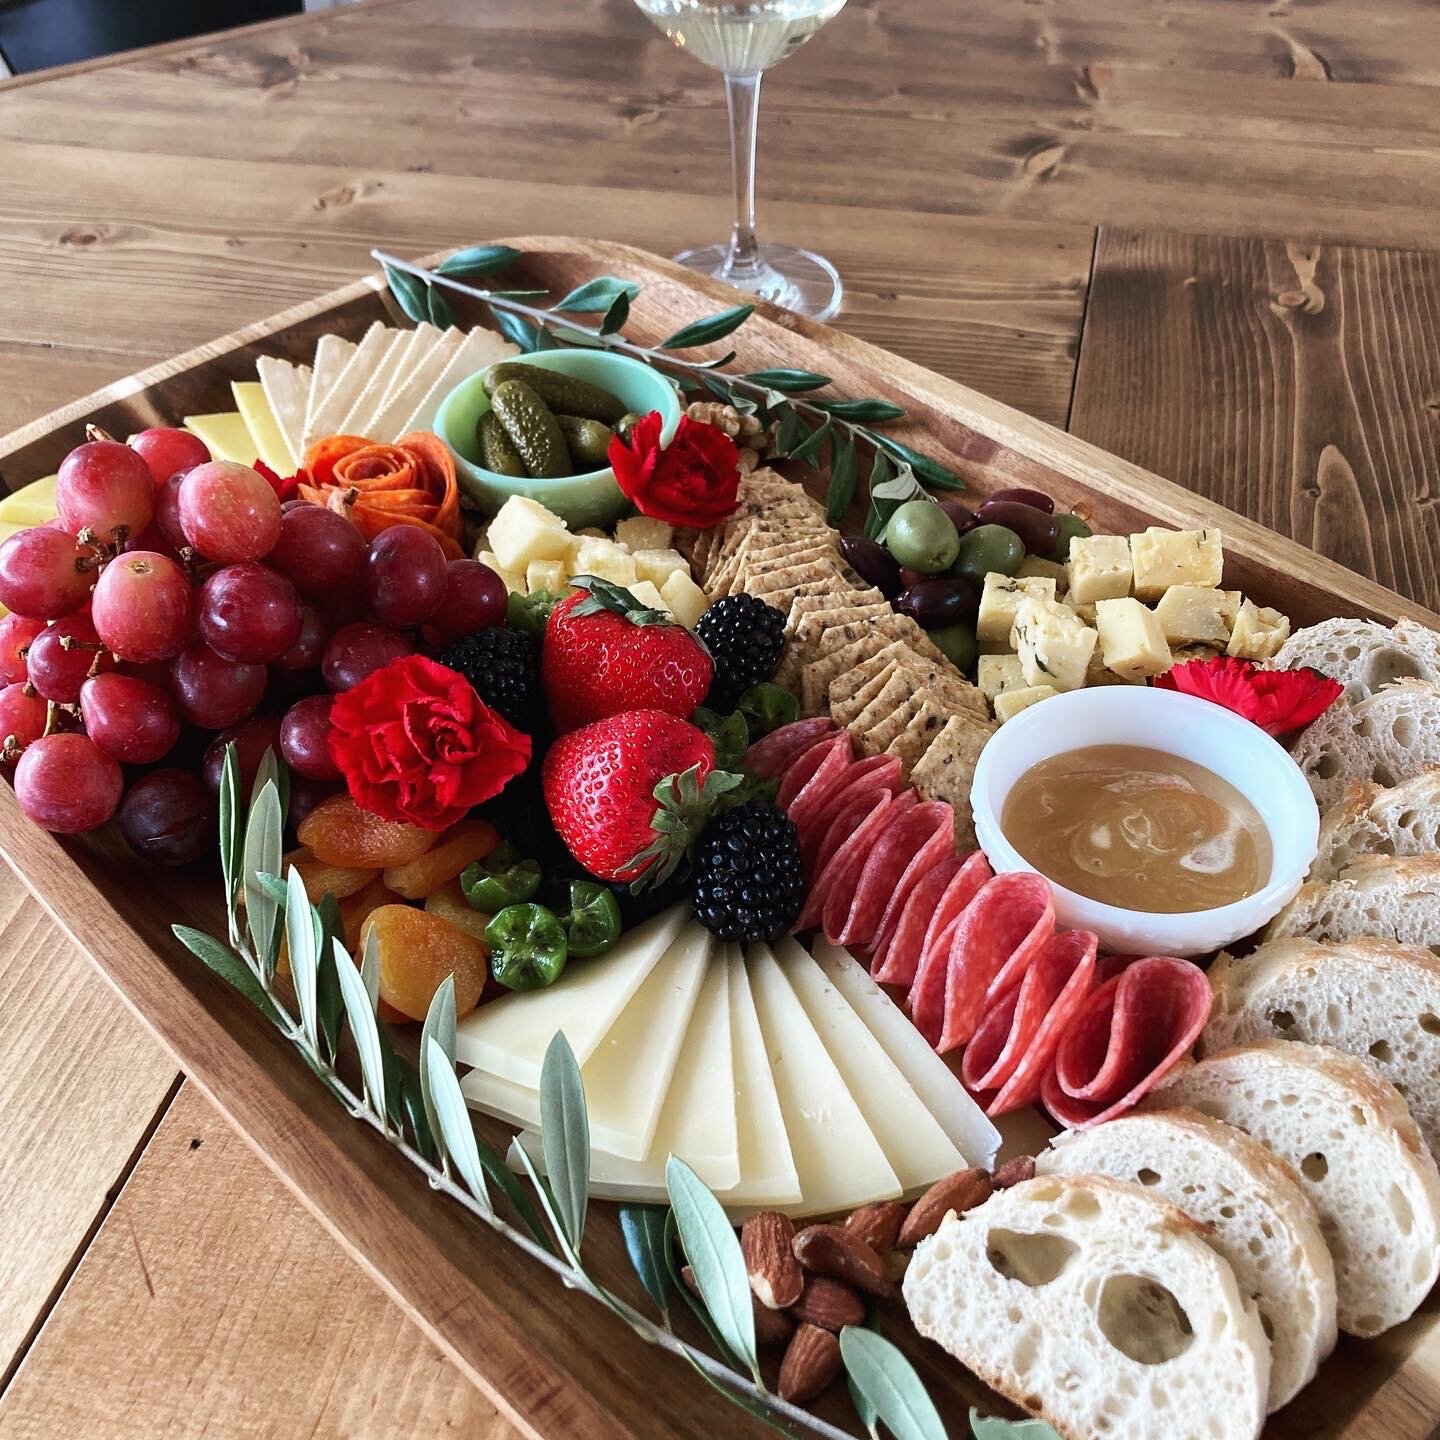 MADE IN MEXICO Model Mexican Wooden Handmade CHEESE BOARD in artisan work Ideal Charcuterie Platter & Serving Tray for Wine and snacks Heritage Embroidery